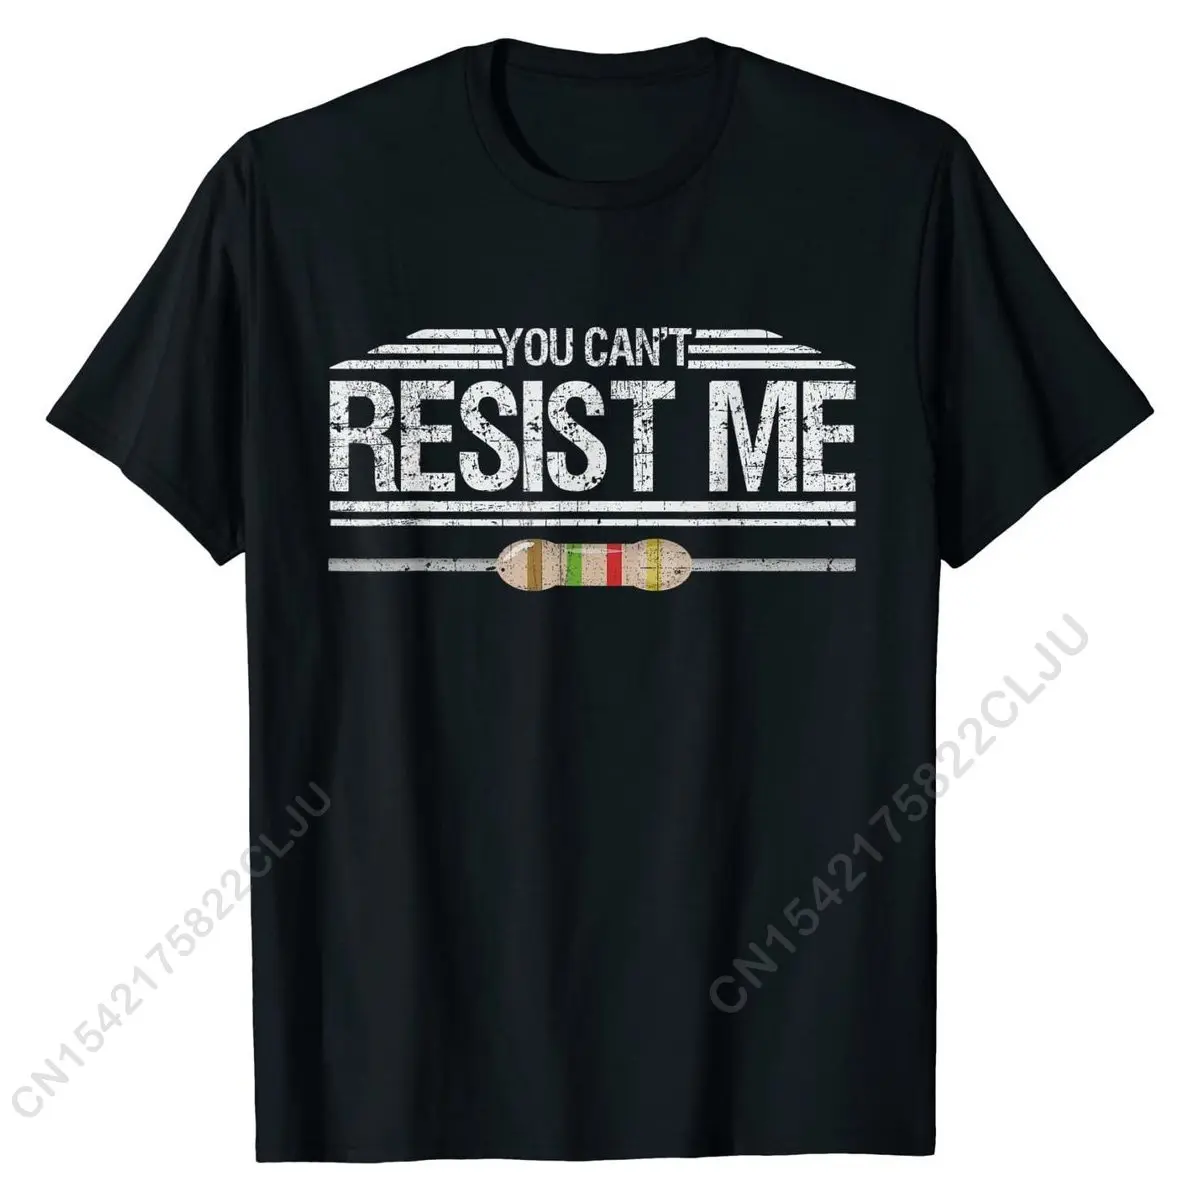 Electrician You Can't Resist Me - Funny Electrical Engineer T-Shirt Cool Cotton Men Tees Customized Discount Top T-shirts